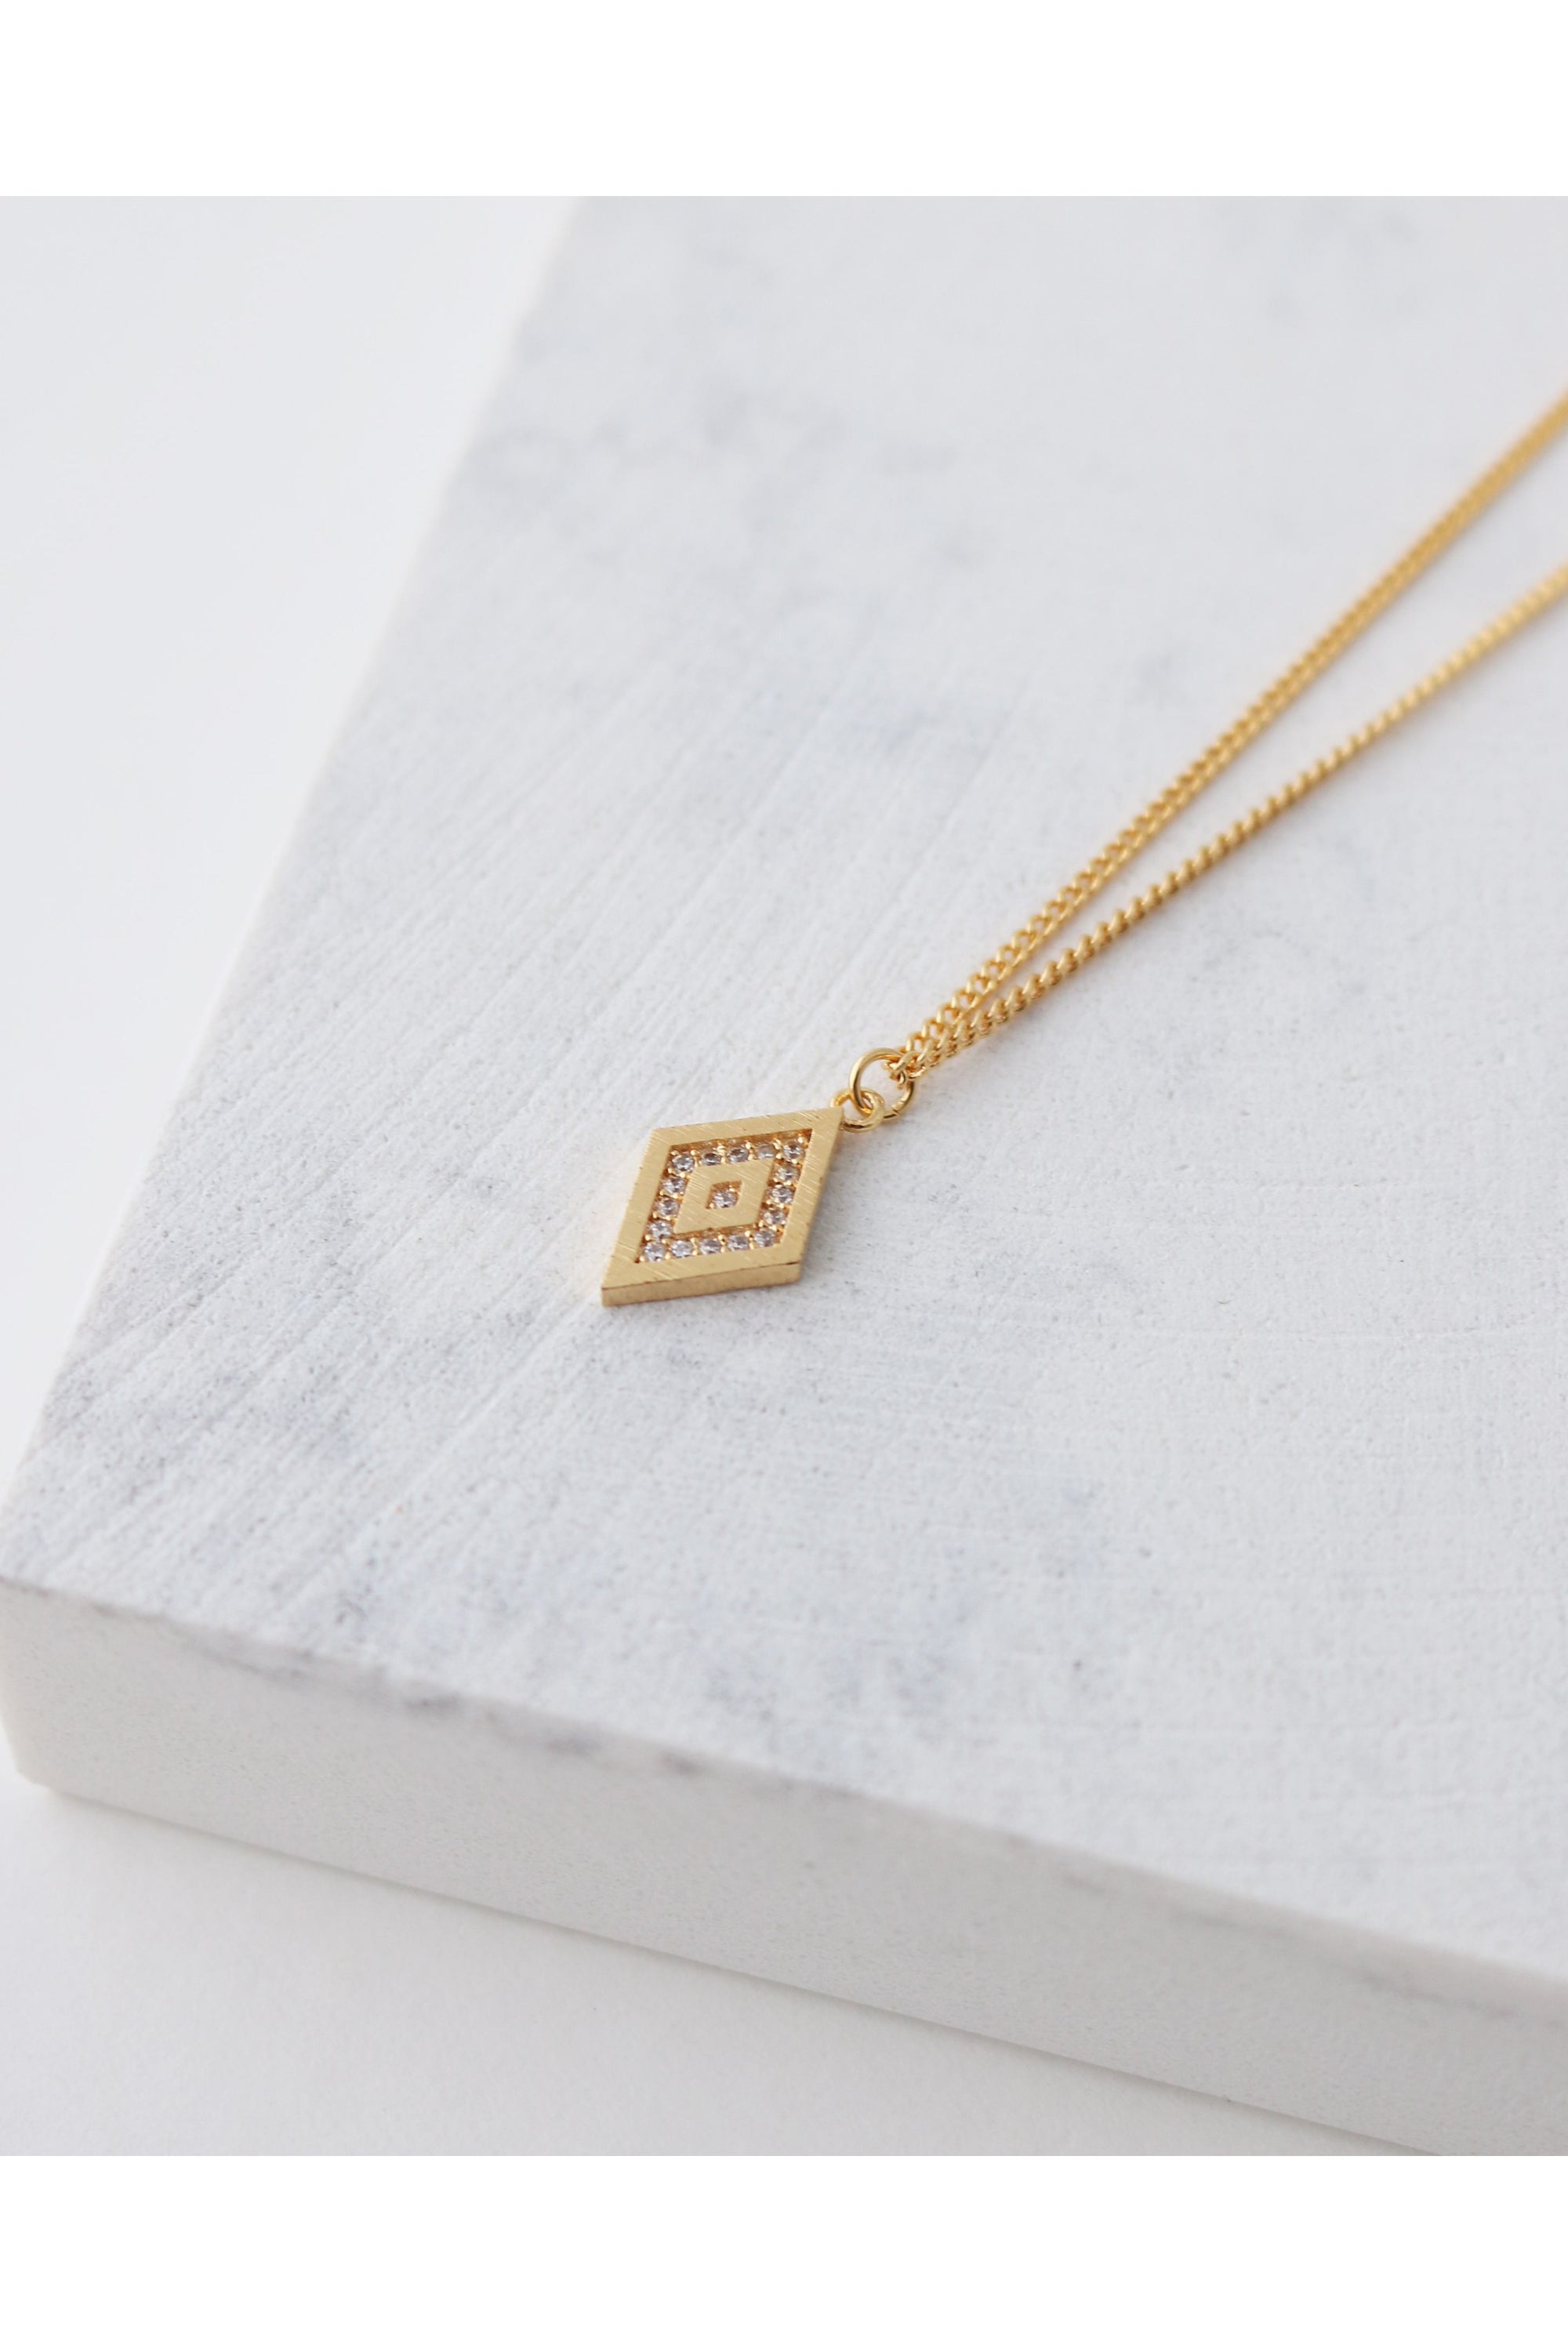 Lover's Tempo One in a Million Pave Diamond Necklace Gold*